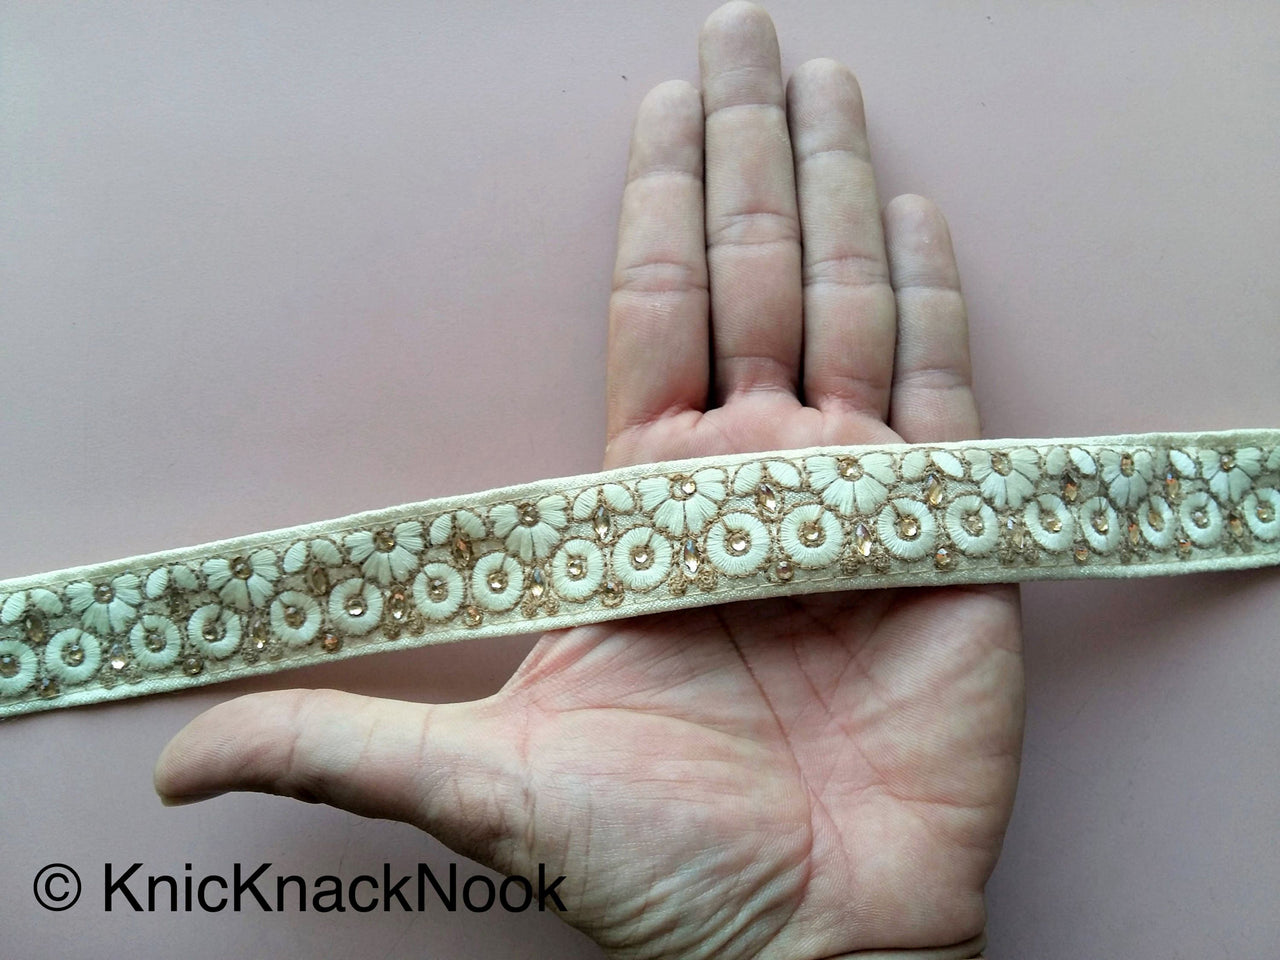 Beige Fabric Trim With Beige / Brown Floral Embroidery With Beads - 200317L457 / 458